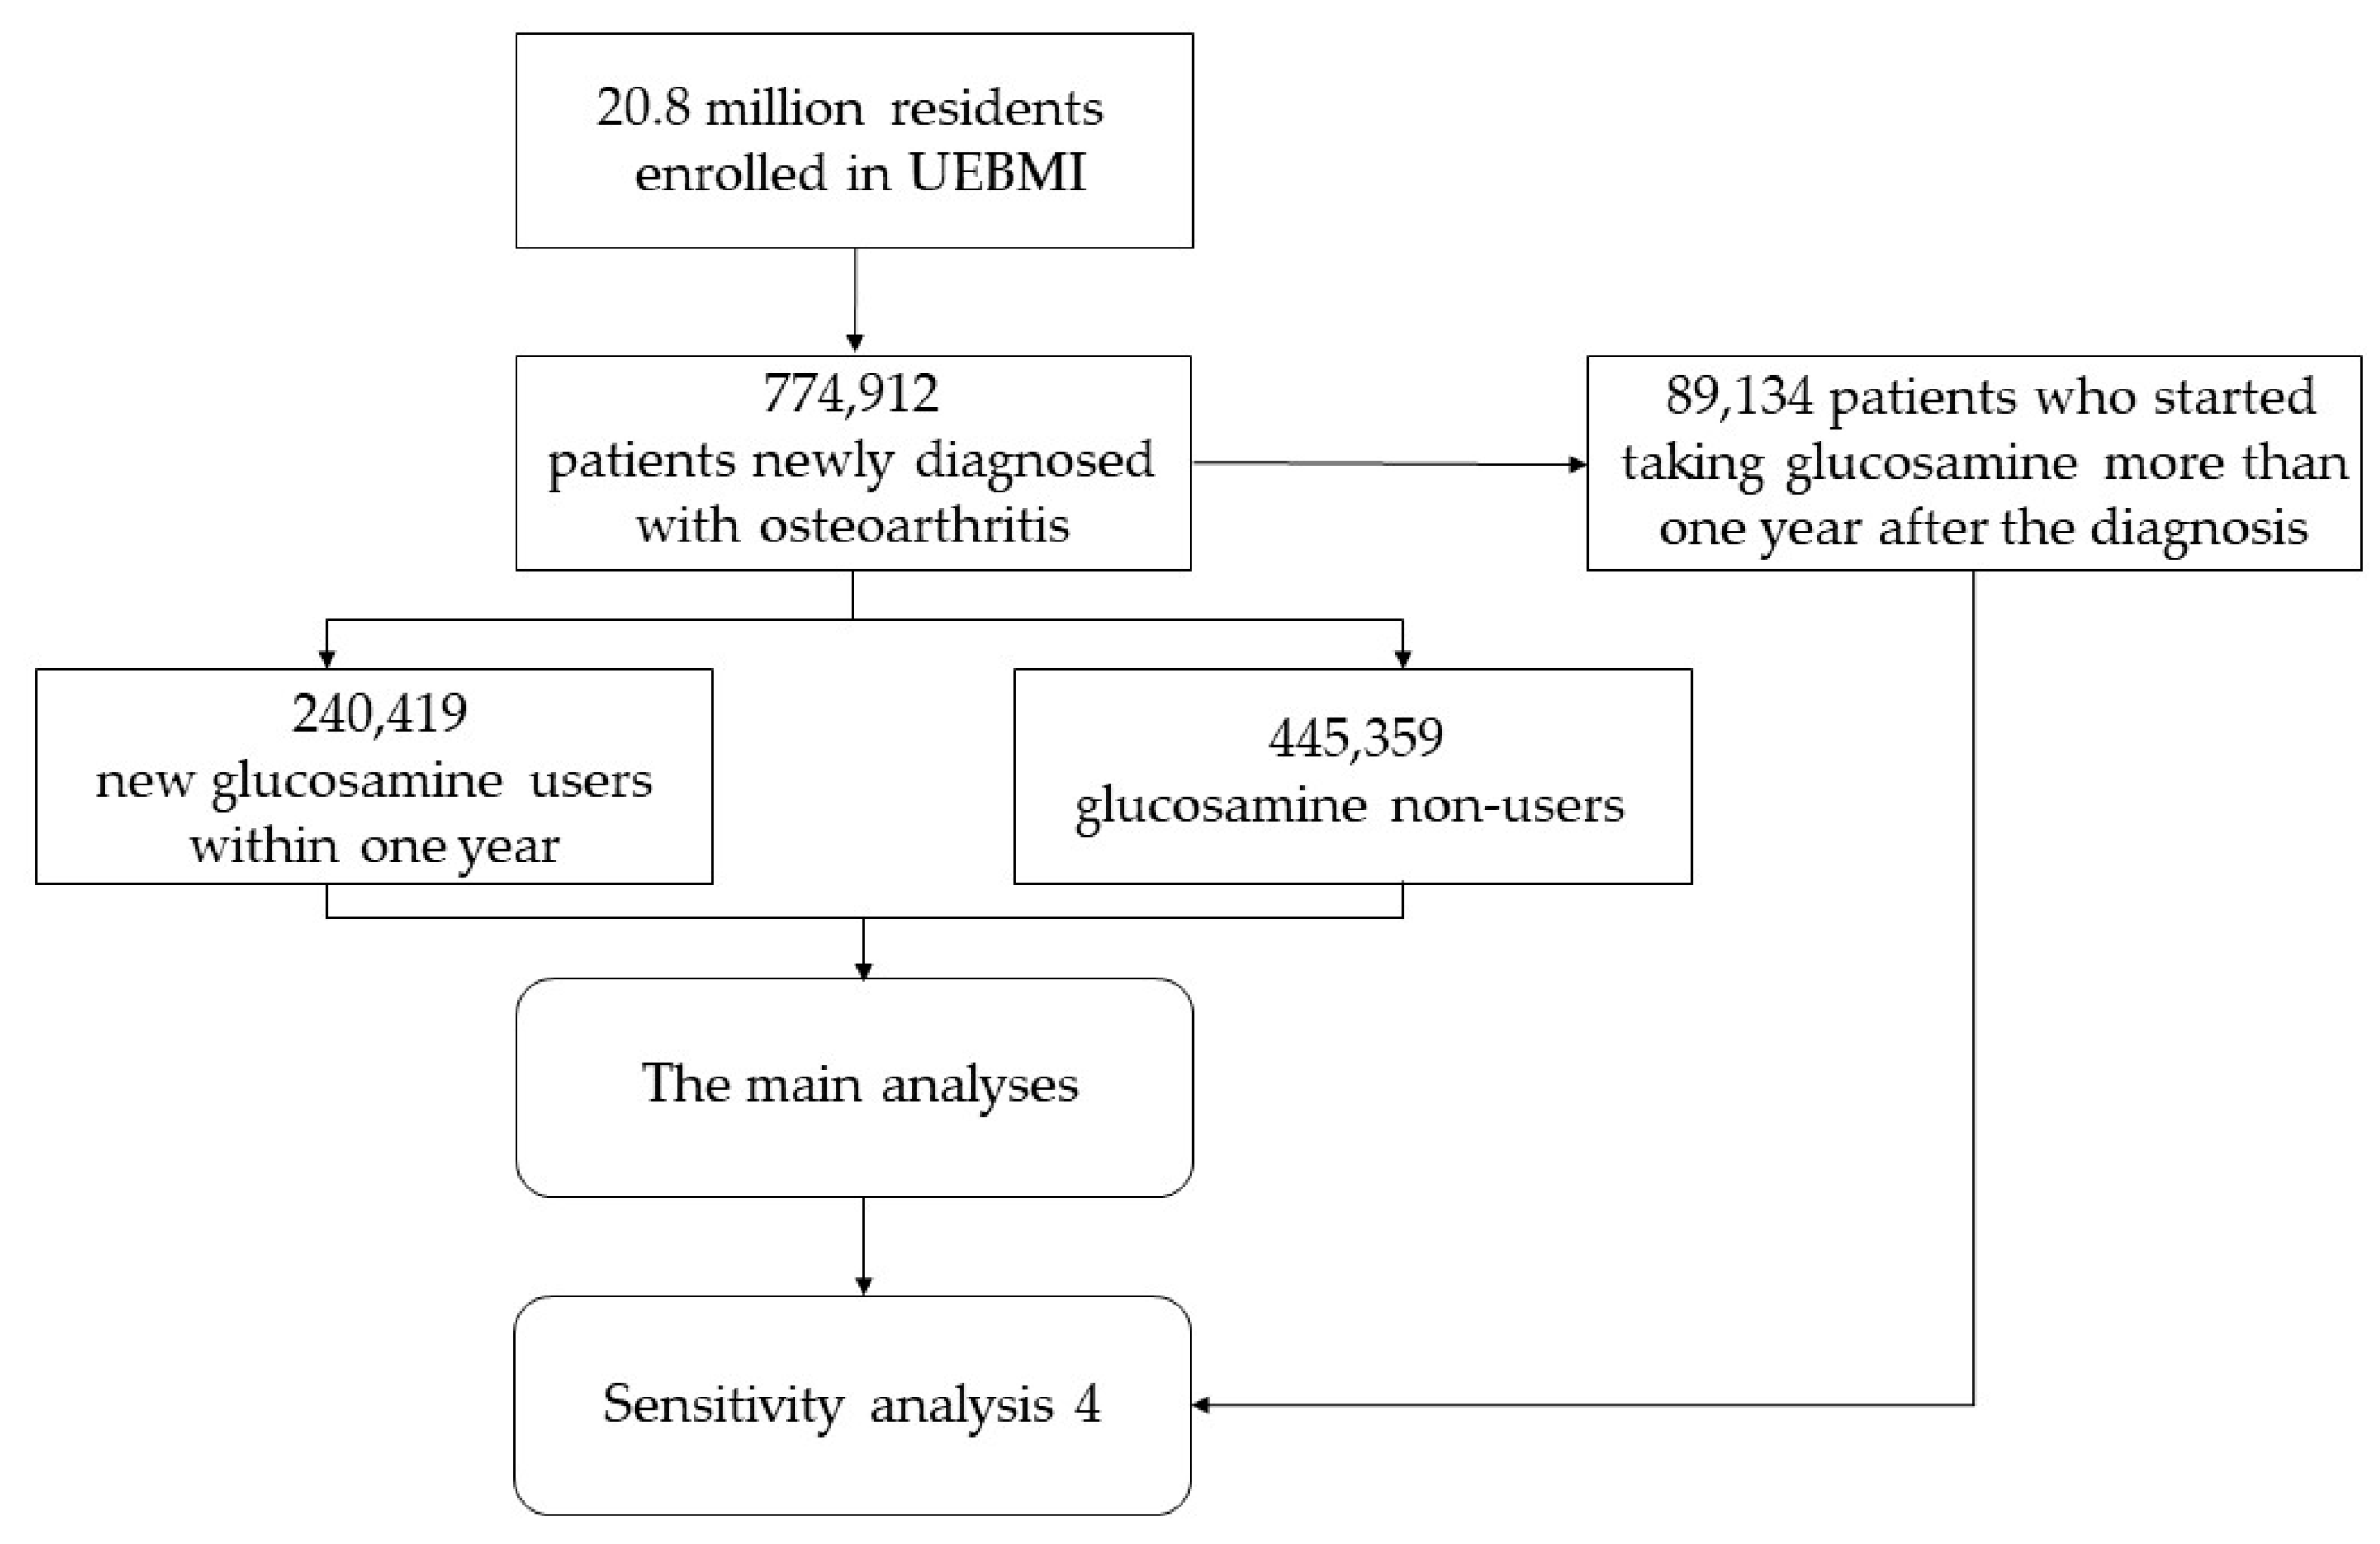 Nutrients | Free Full-Text | Glucosamine Use Is Associated with a Higher  Risk of Cardiovascular Diseases in Patients with Osteoarthritis: Results  from a Large Study in 685,778 Subjects